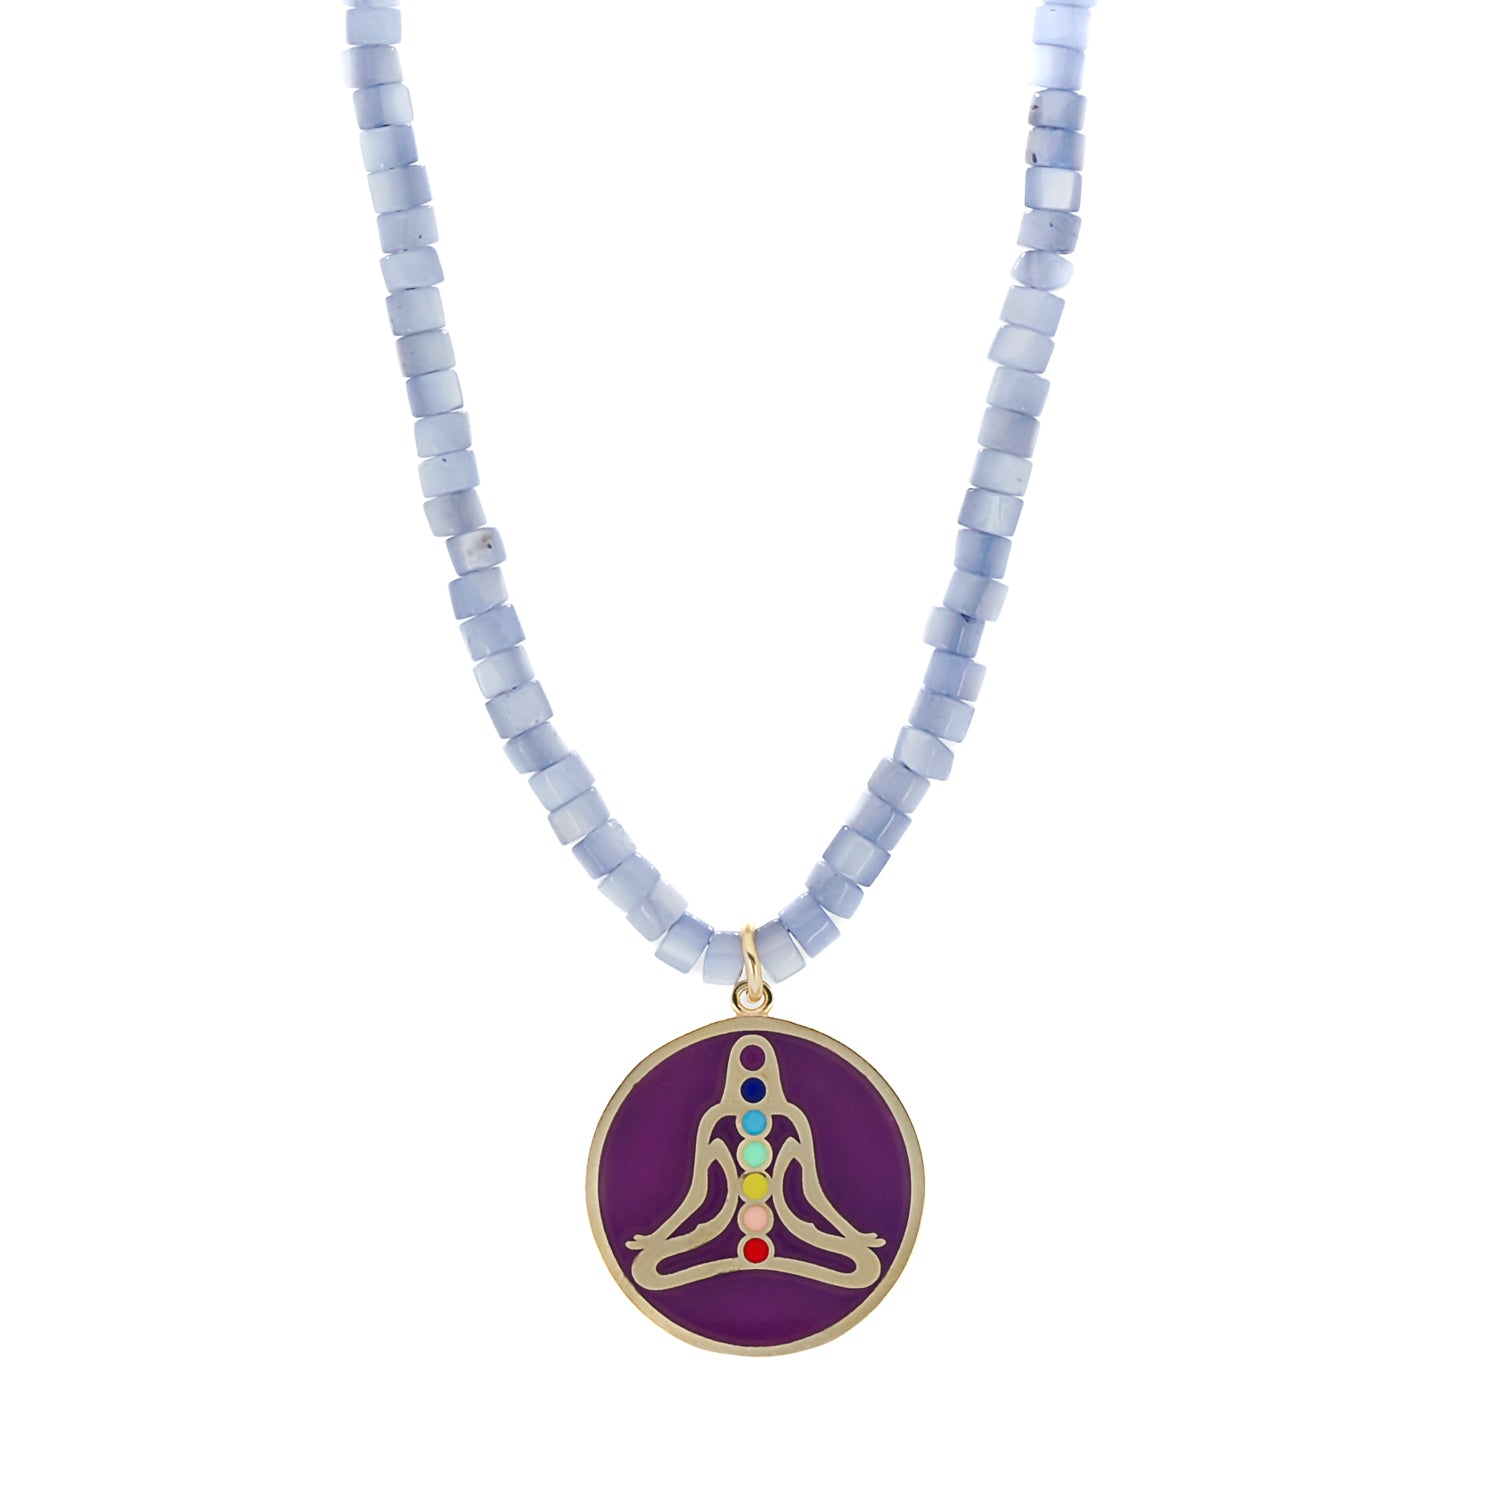 Purple Chakra Necklace featuring a handmade chakra pendant and lilac color pearl beads.